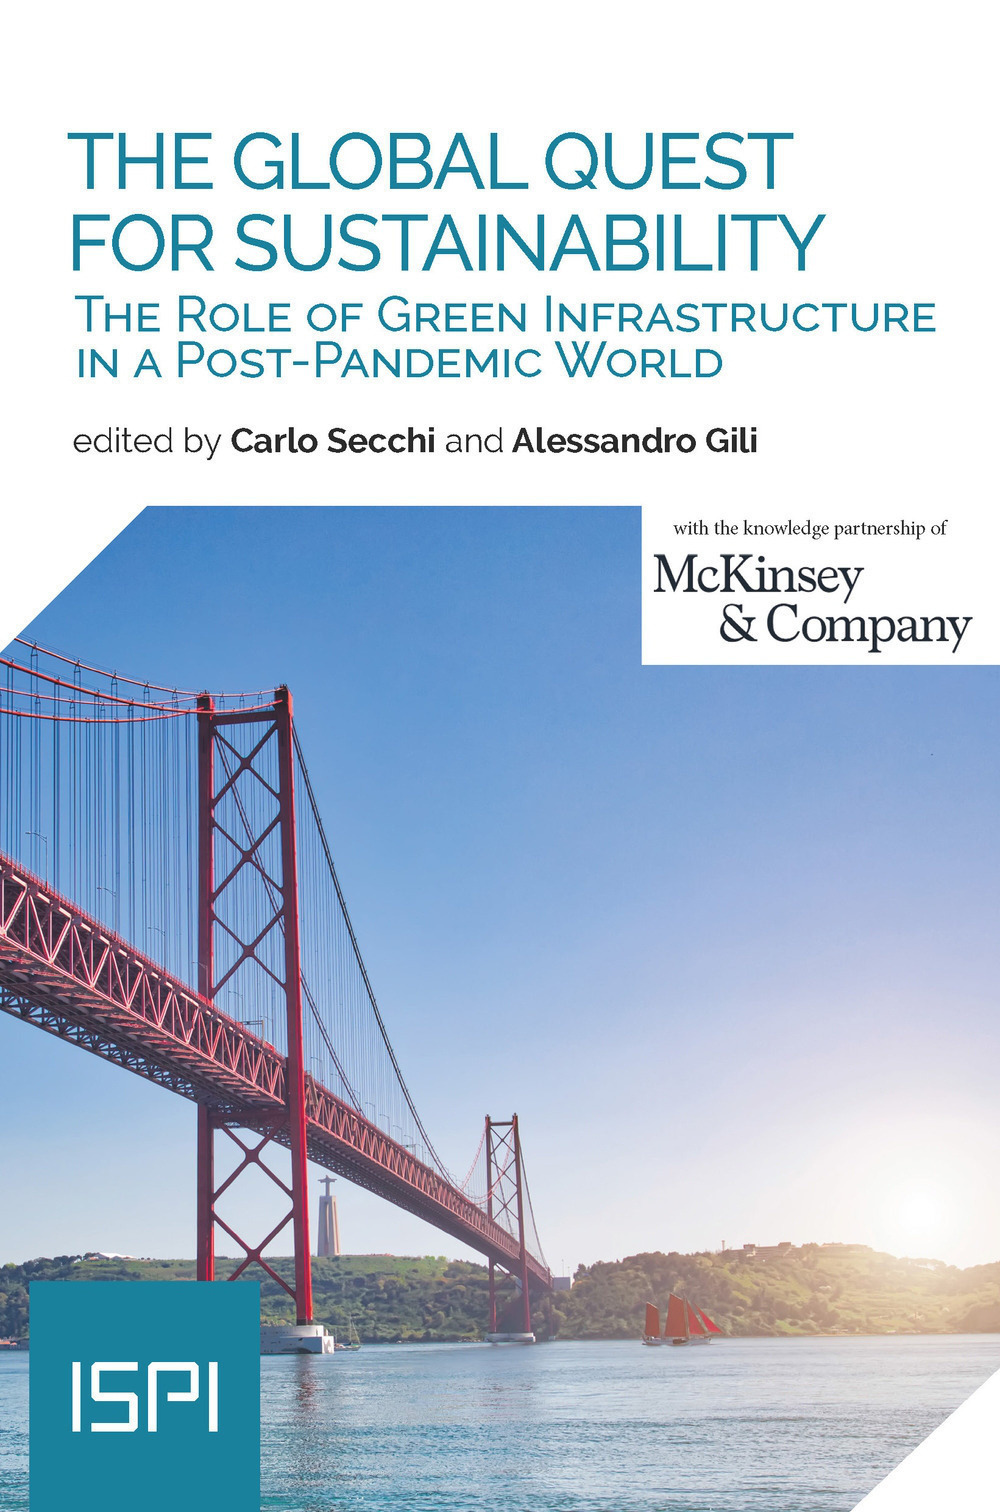 The global quest for sustainability. The role of green infrastructure in a post-pandemic world